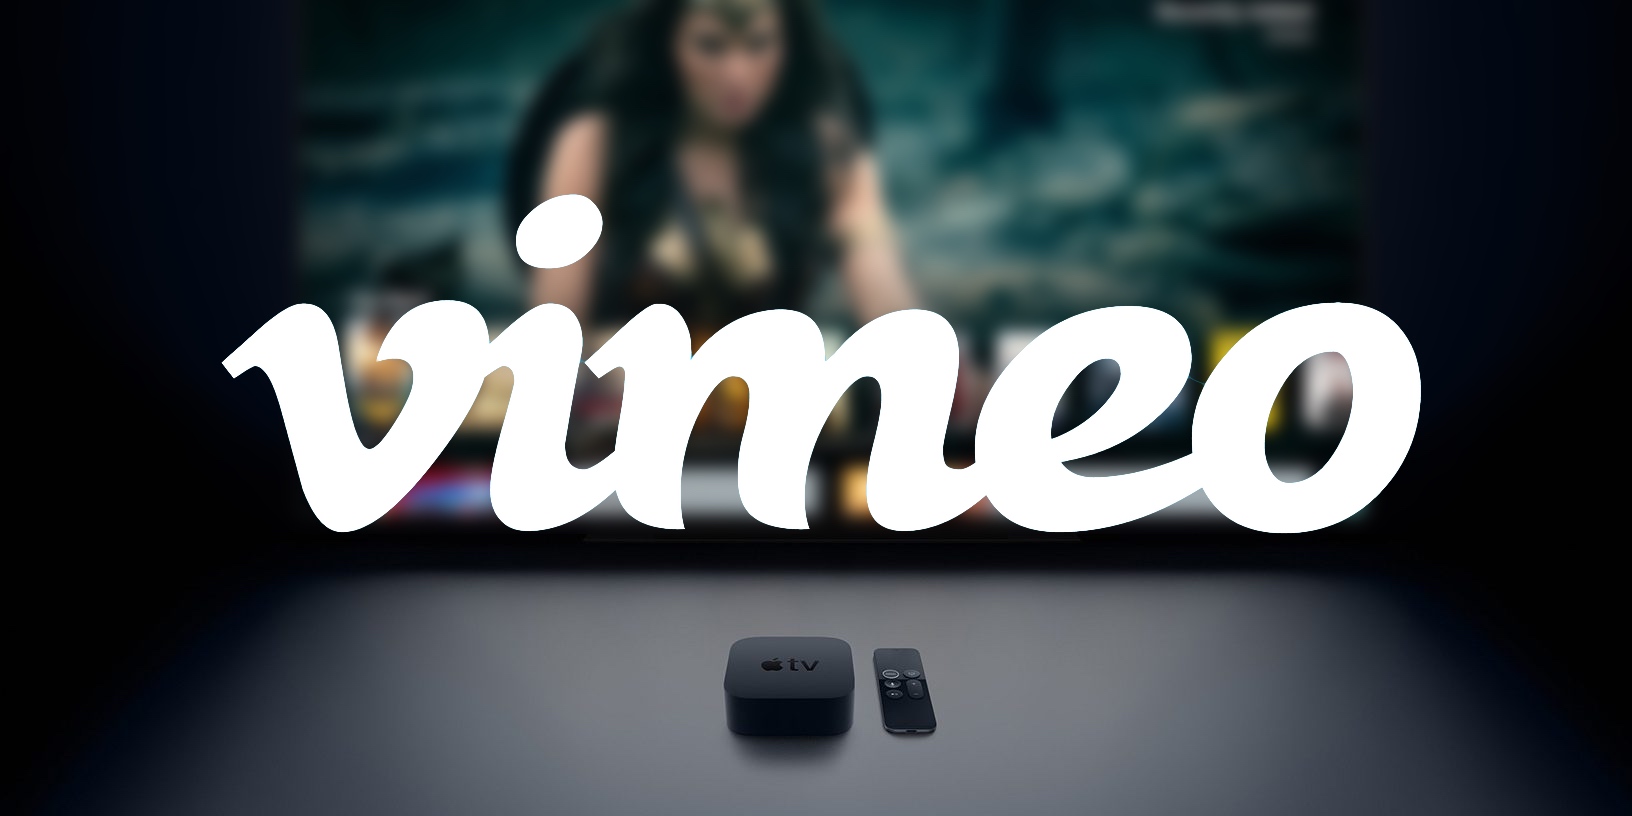 Vimeo launches HDR video hosting, playable on iPhone X, iPad Pro, and Apple  TV 4K - 9to5Mac